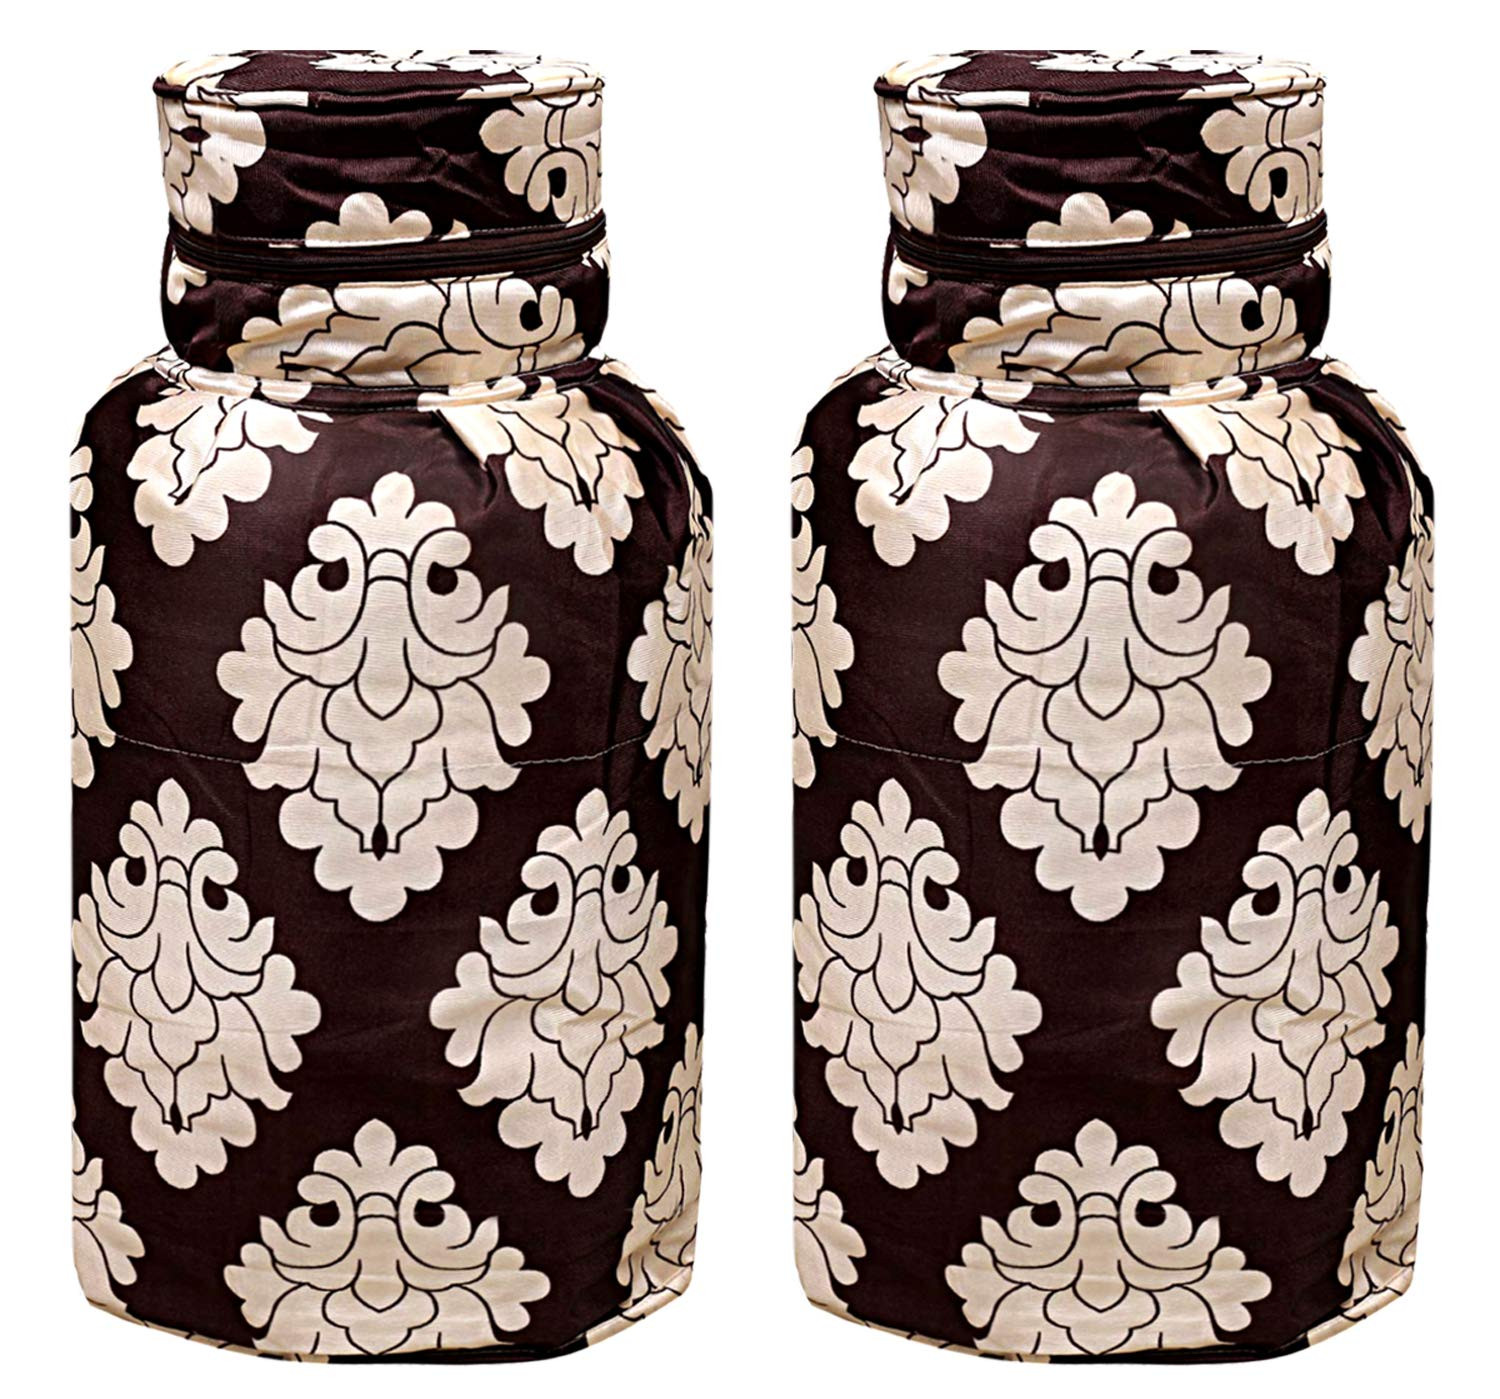 Kuber Industries Polyester Dust-Water Proof LPG Gas Cylinder Cover (Brown)-Pack of 2-KUBMART15482 (Model Number: KUBMART015482)